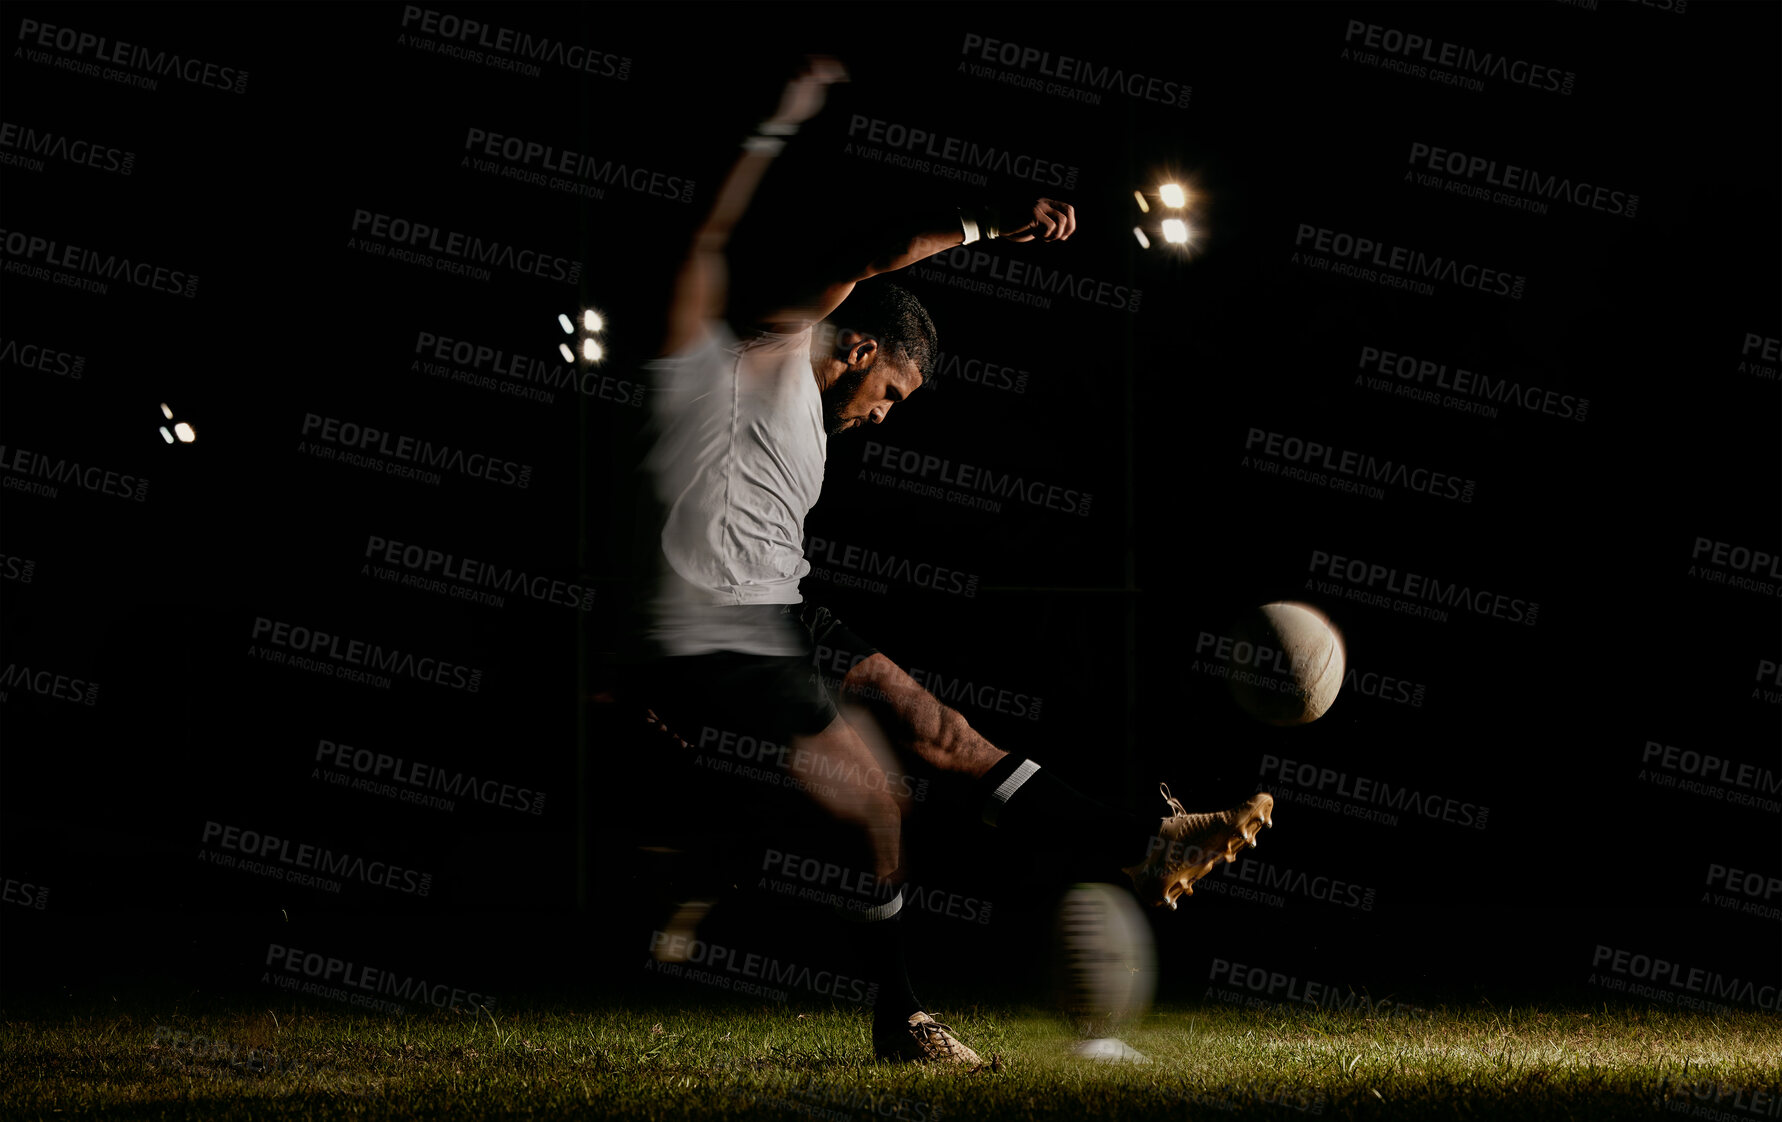 Buy stock photo Rugby, night and man kicking ball to score goal at dark stadium at game, match or practice workout. Sports, fitness and motion, player with blurred action on grass with energy and skill in team sport